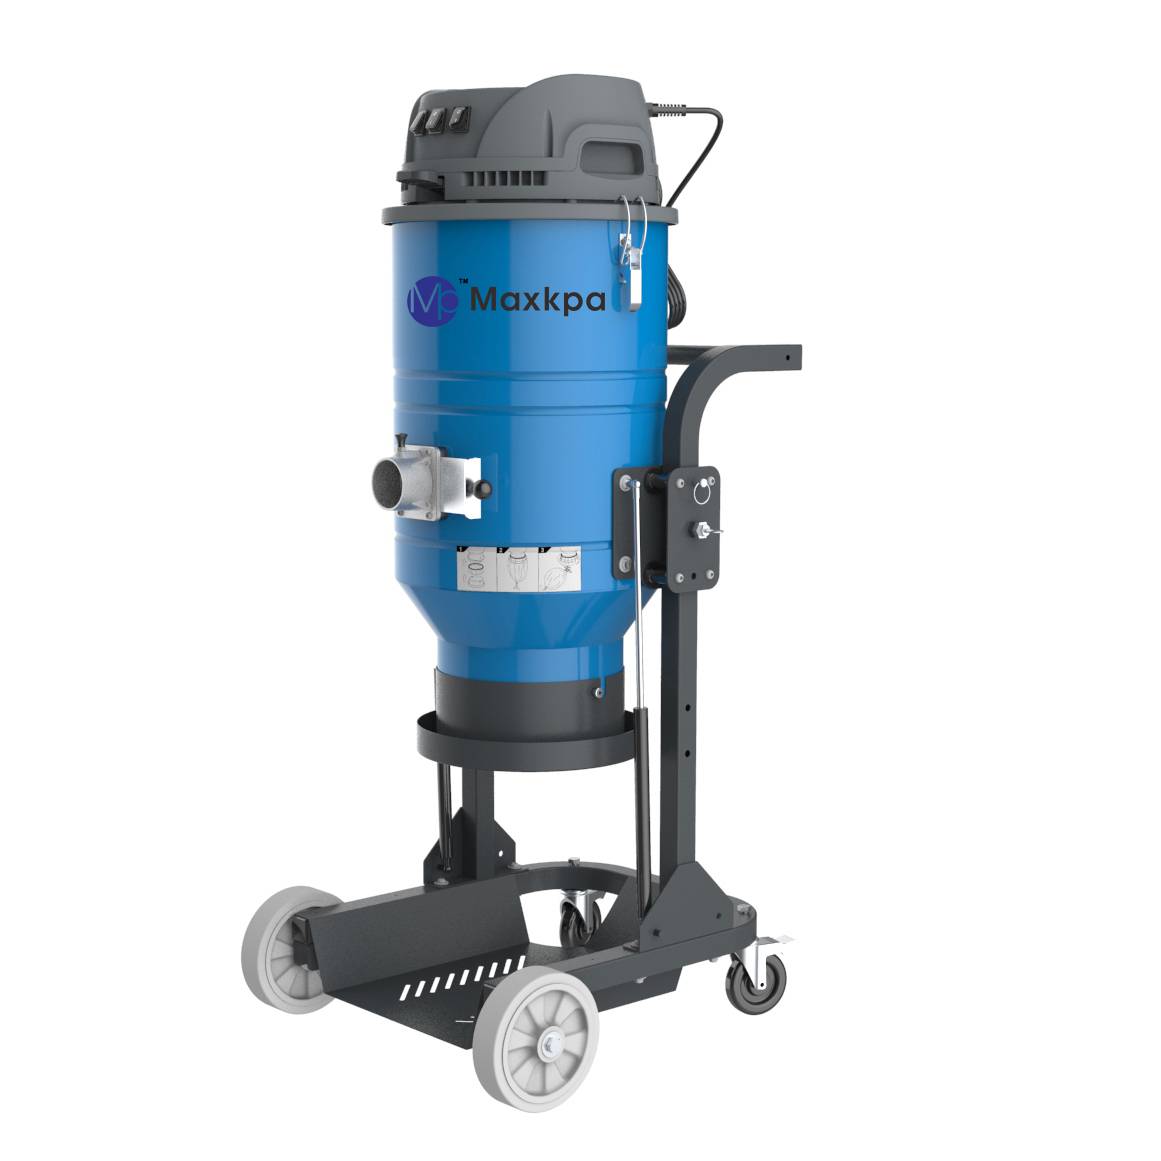 TS2000 Single phase HEPA dust extractor Featured Image